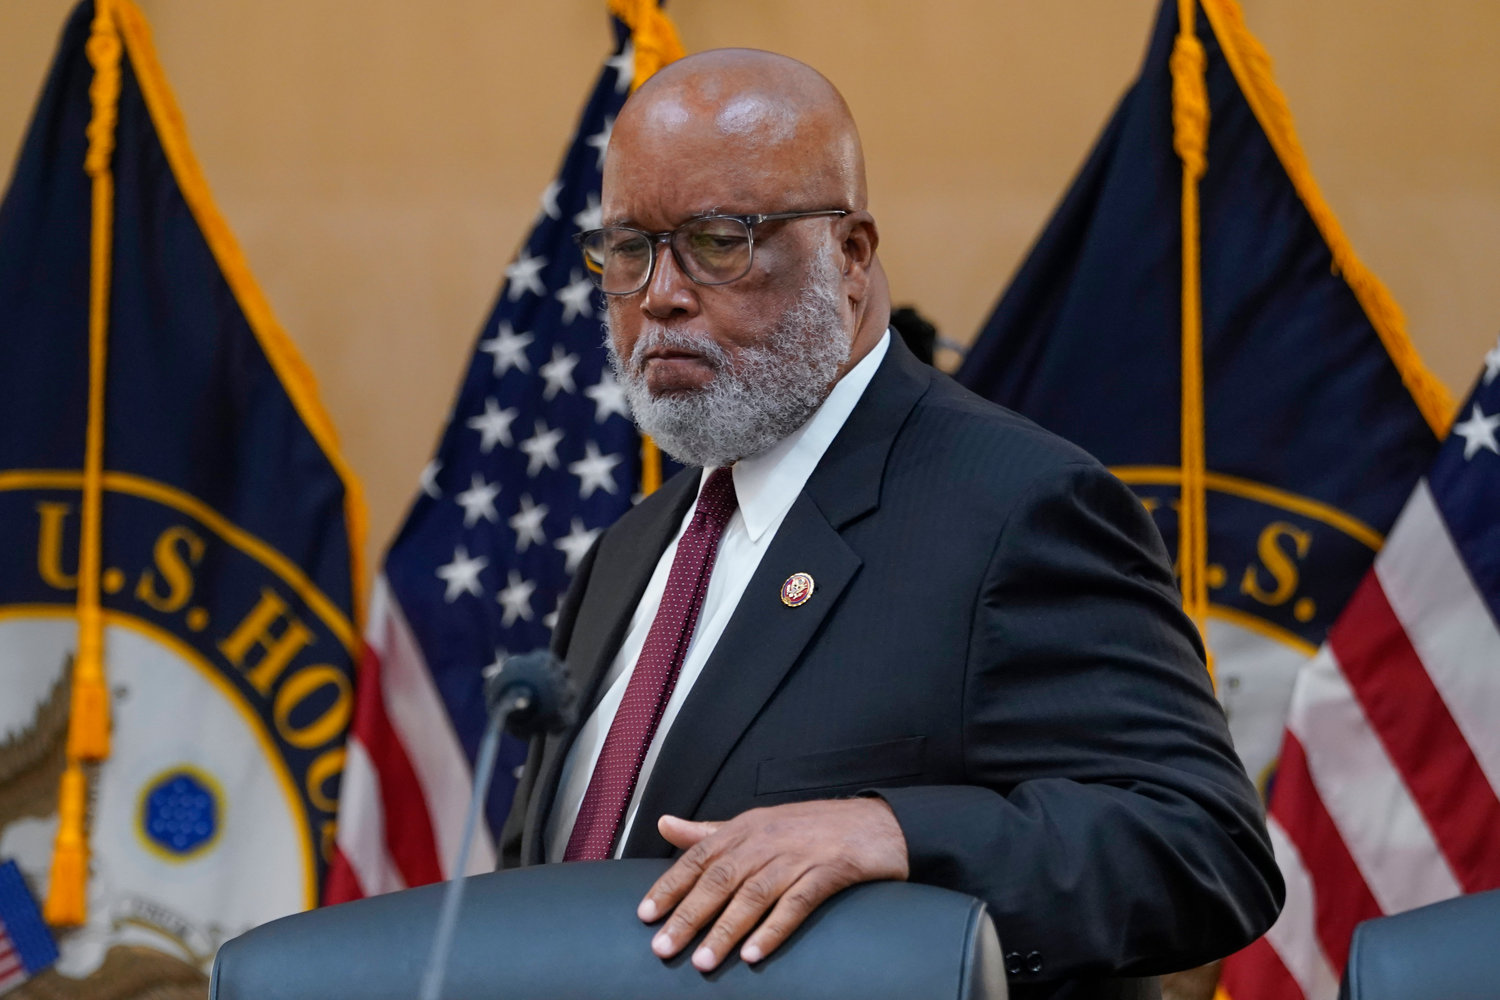 Chairman Rep. Bennie Thompson, D-Miss., arrives as the House select committee investigating the Jan. 6 attack on the U.S. Capitol continues to reveal its findings of a year-long investigation, at the Capitol in Washington, Tuesday, June 21, 2022. (AP Photo/Jacquelyn Martin)